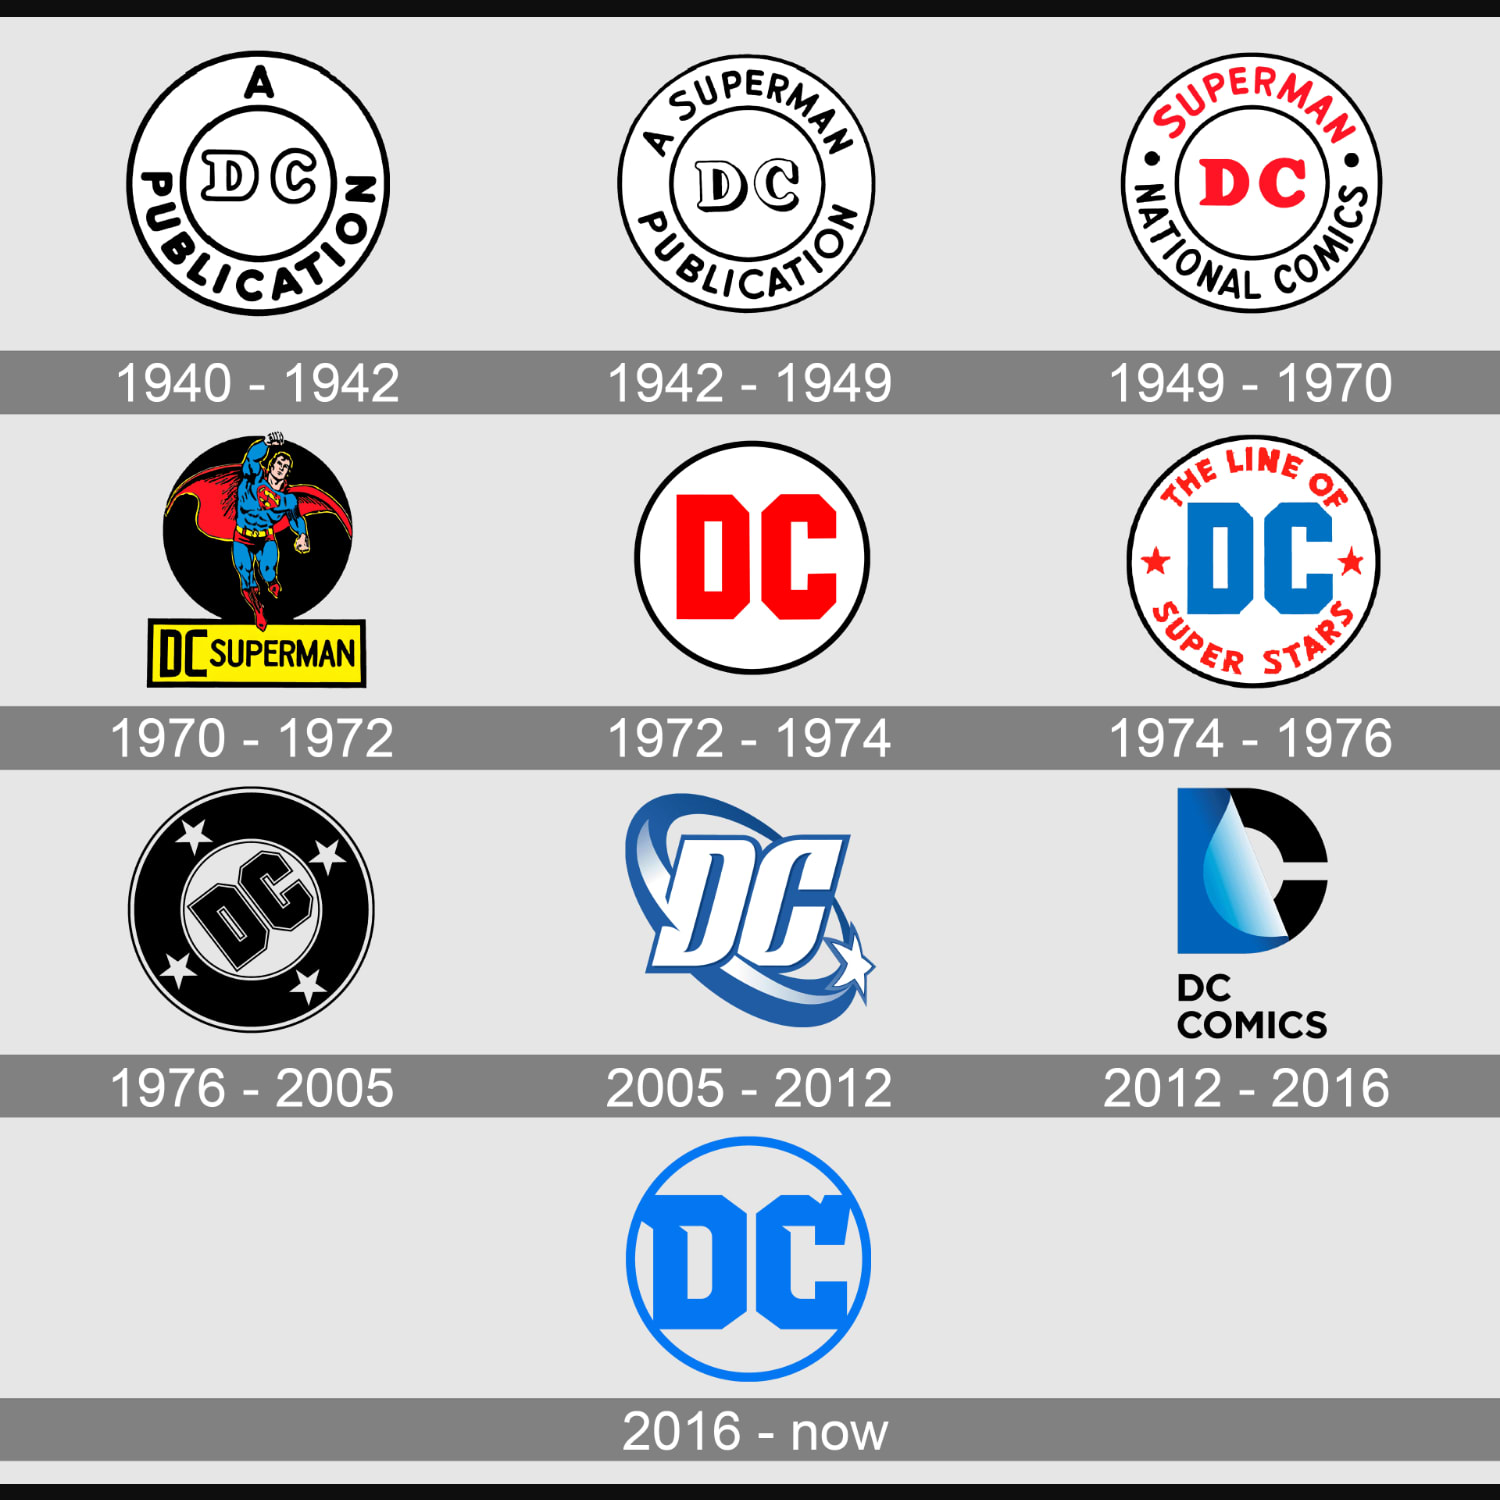 Which DC logo is your favorite?